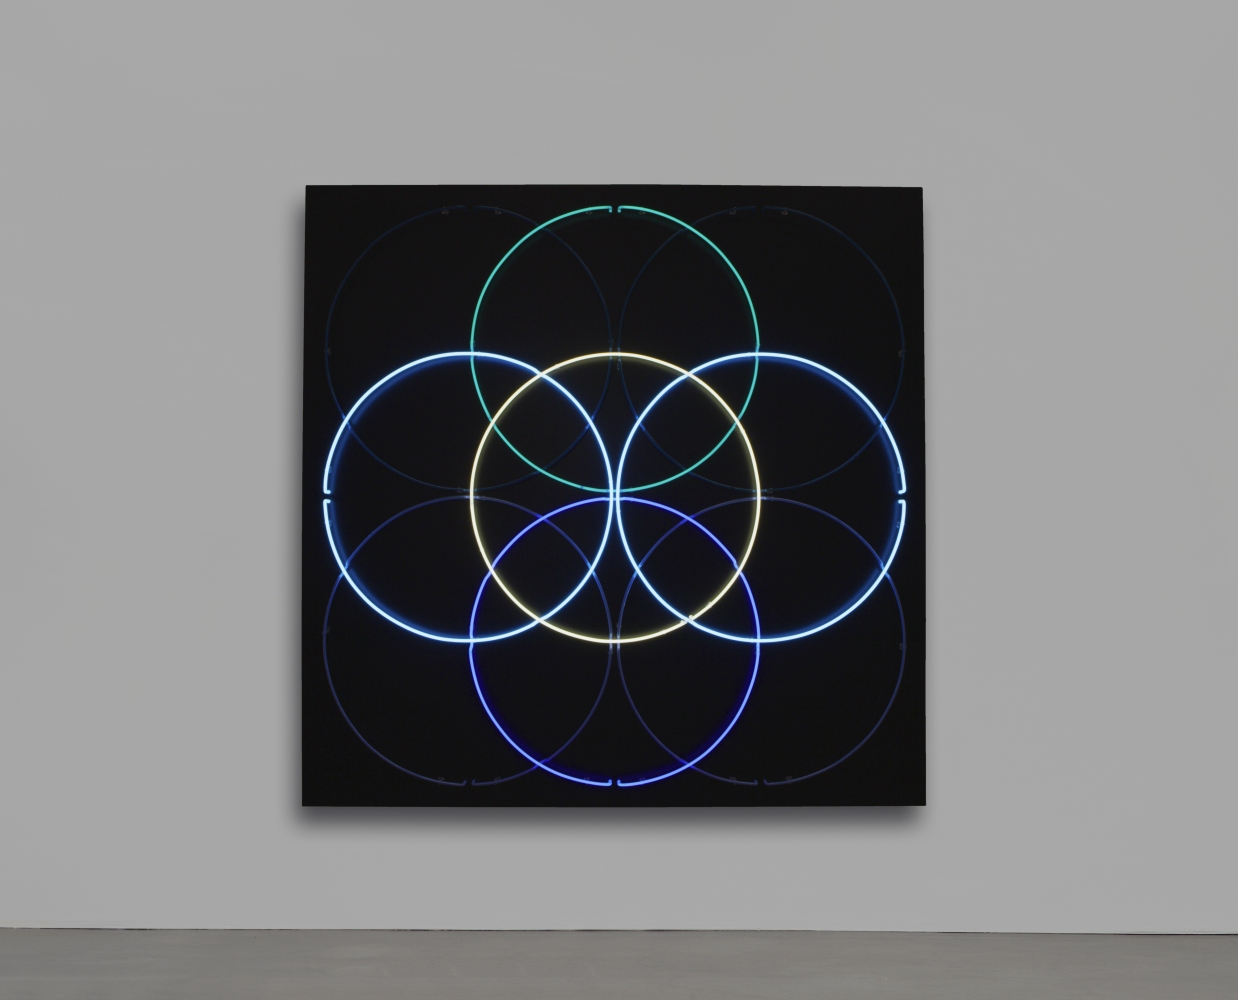 Doug Aitken

Not yet titled

2019

Neon, wood

82 x 82 x 6 1/2 inches (208.3 x 208.3 x 16.5 cm)

Edition&amp;nbsp;of 4, with 2 AP

DA 618

&amp;nbsp;

INQUIRE